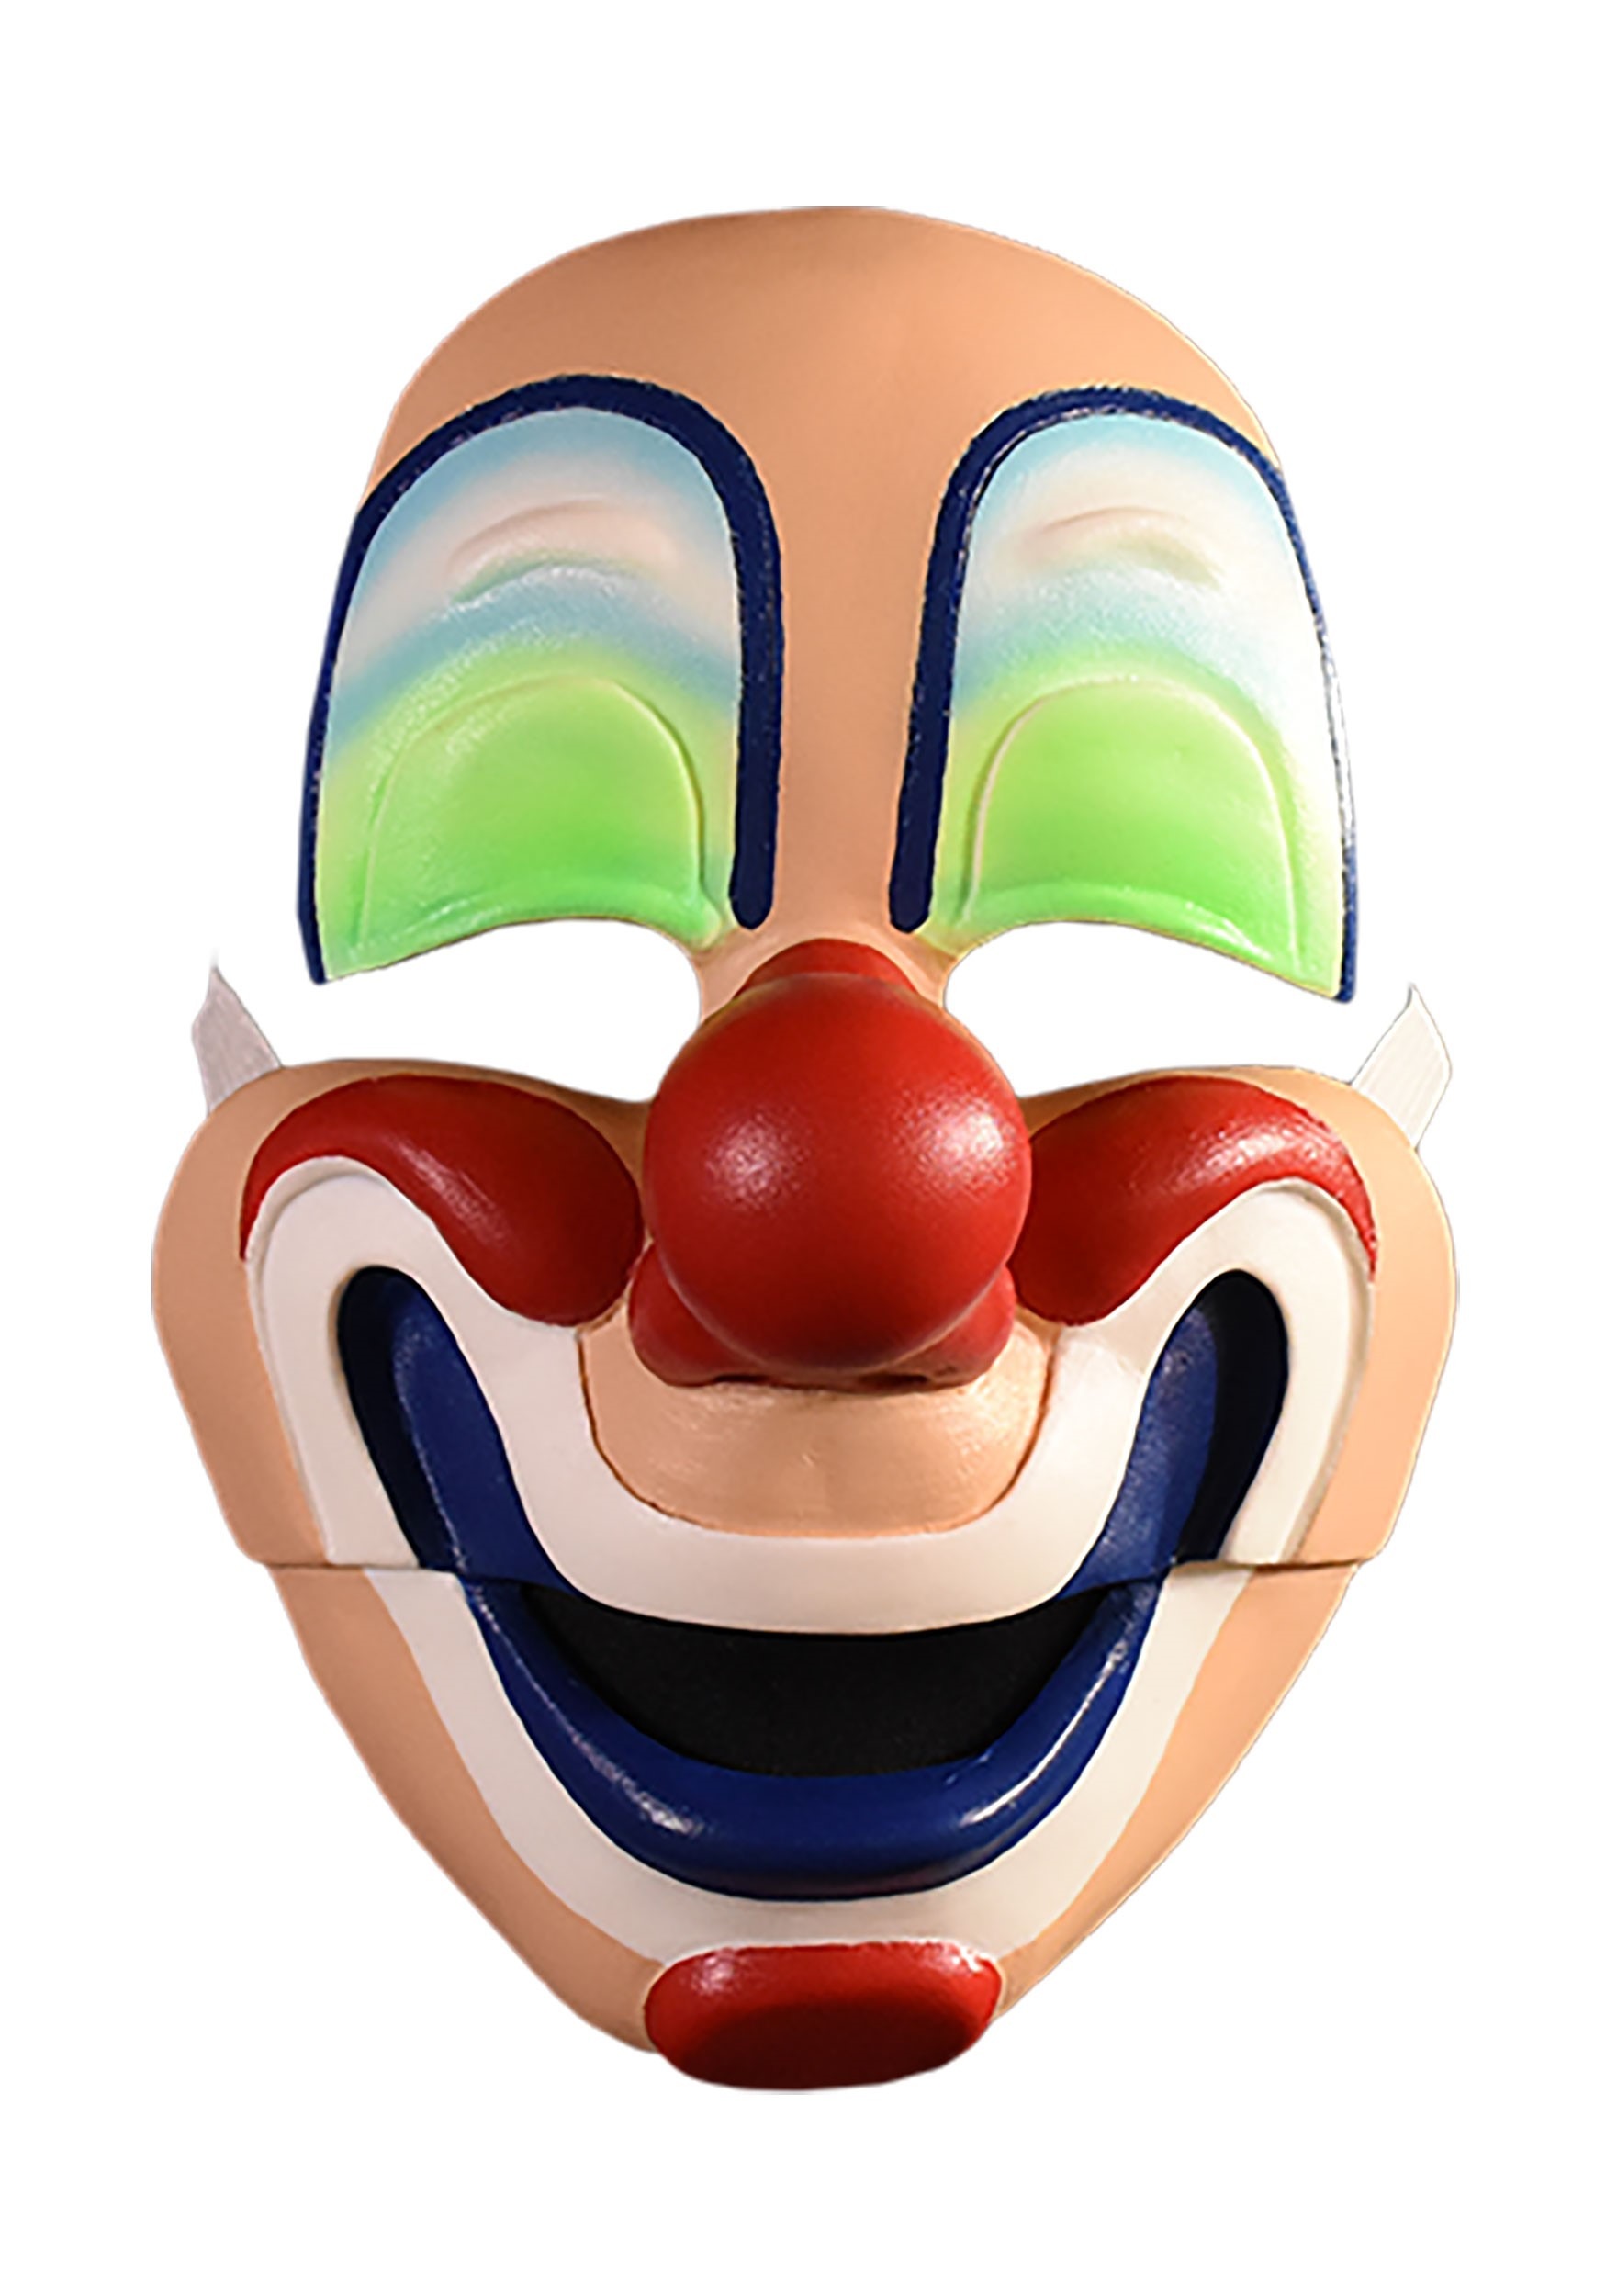 Halloween Young Michael Clown Mask for Adults